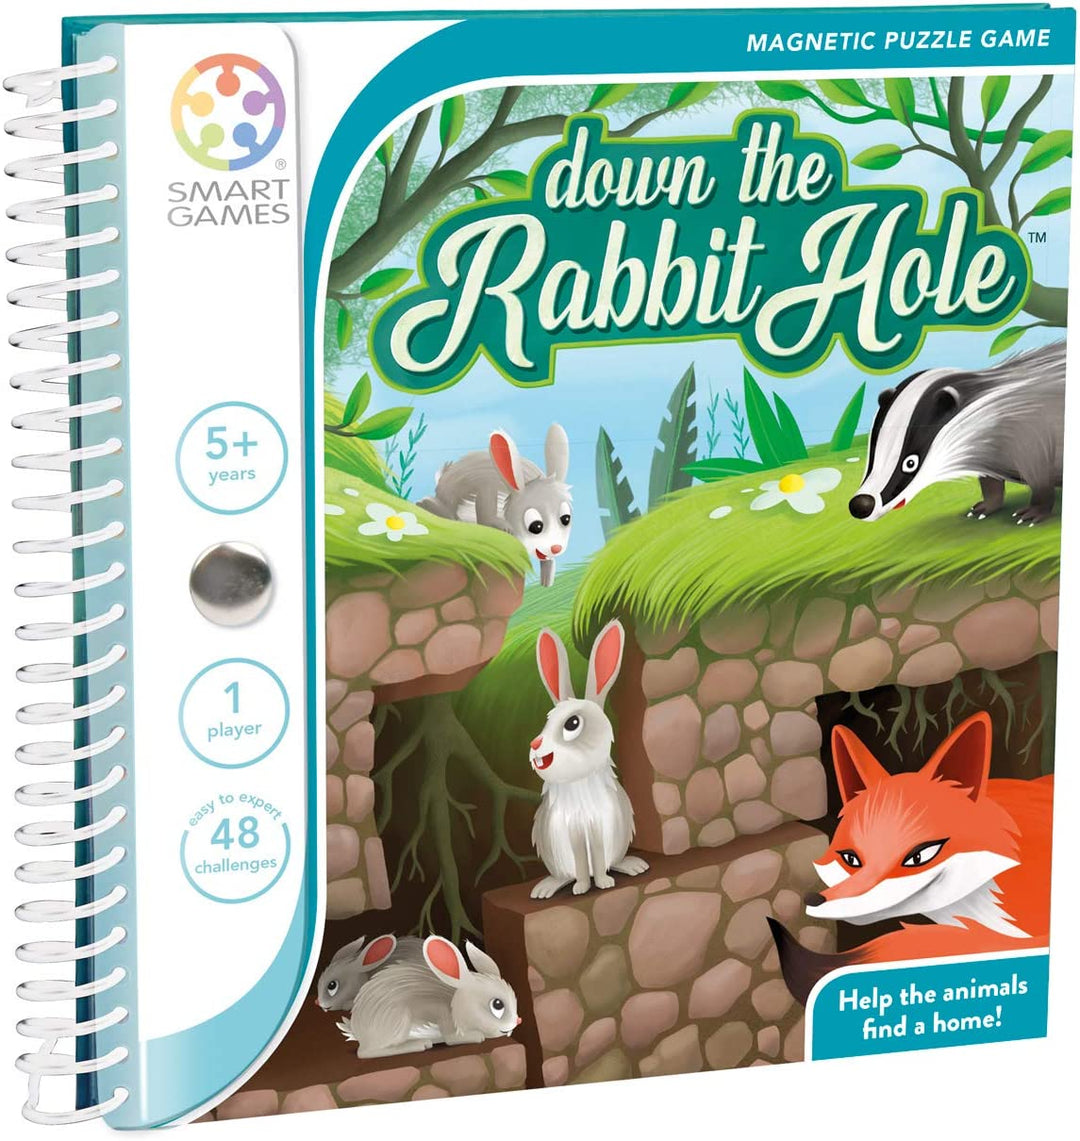 Magnetic Puzzle Game - Down the Rabbit Hole